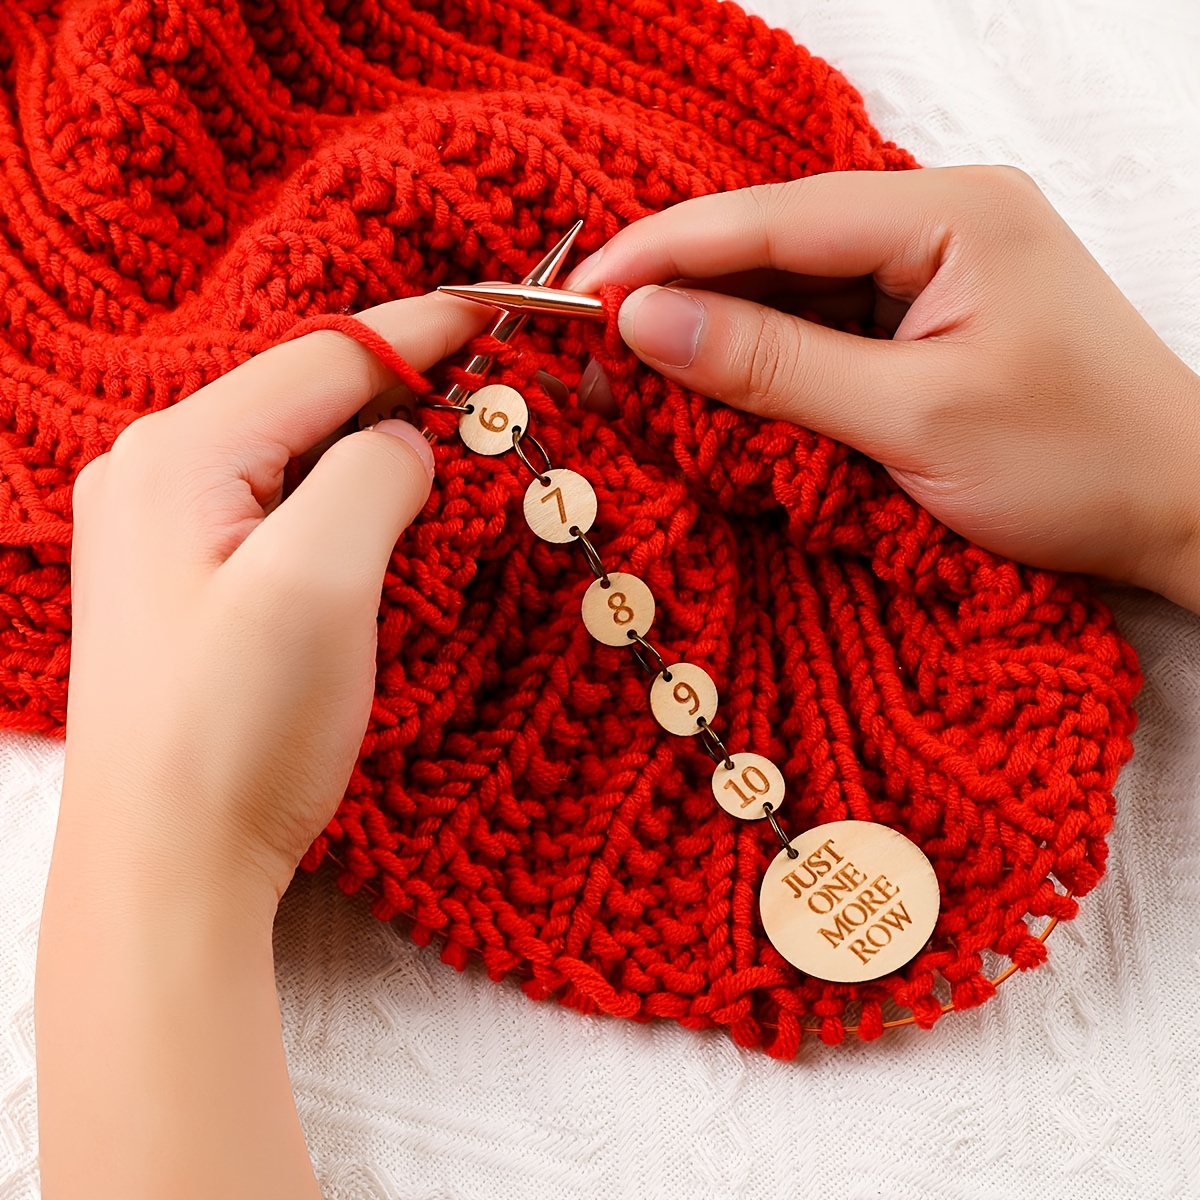 How to Make Stitch Markers for Crocheting and Knitting